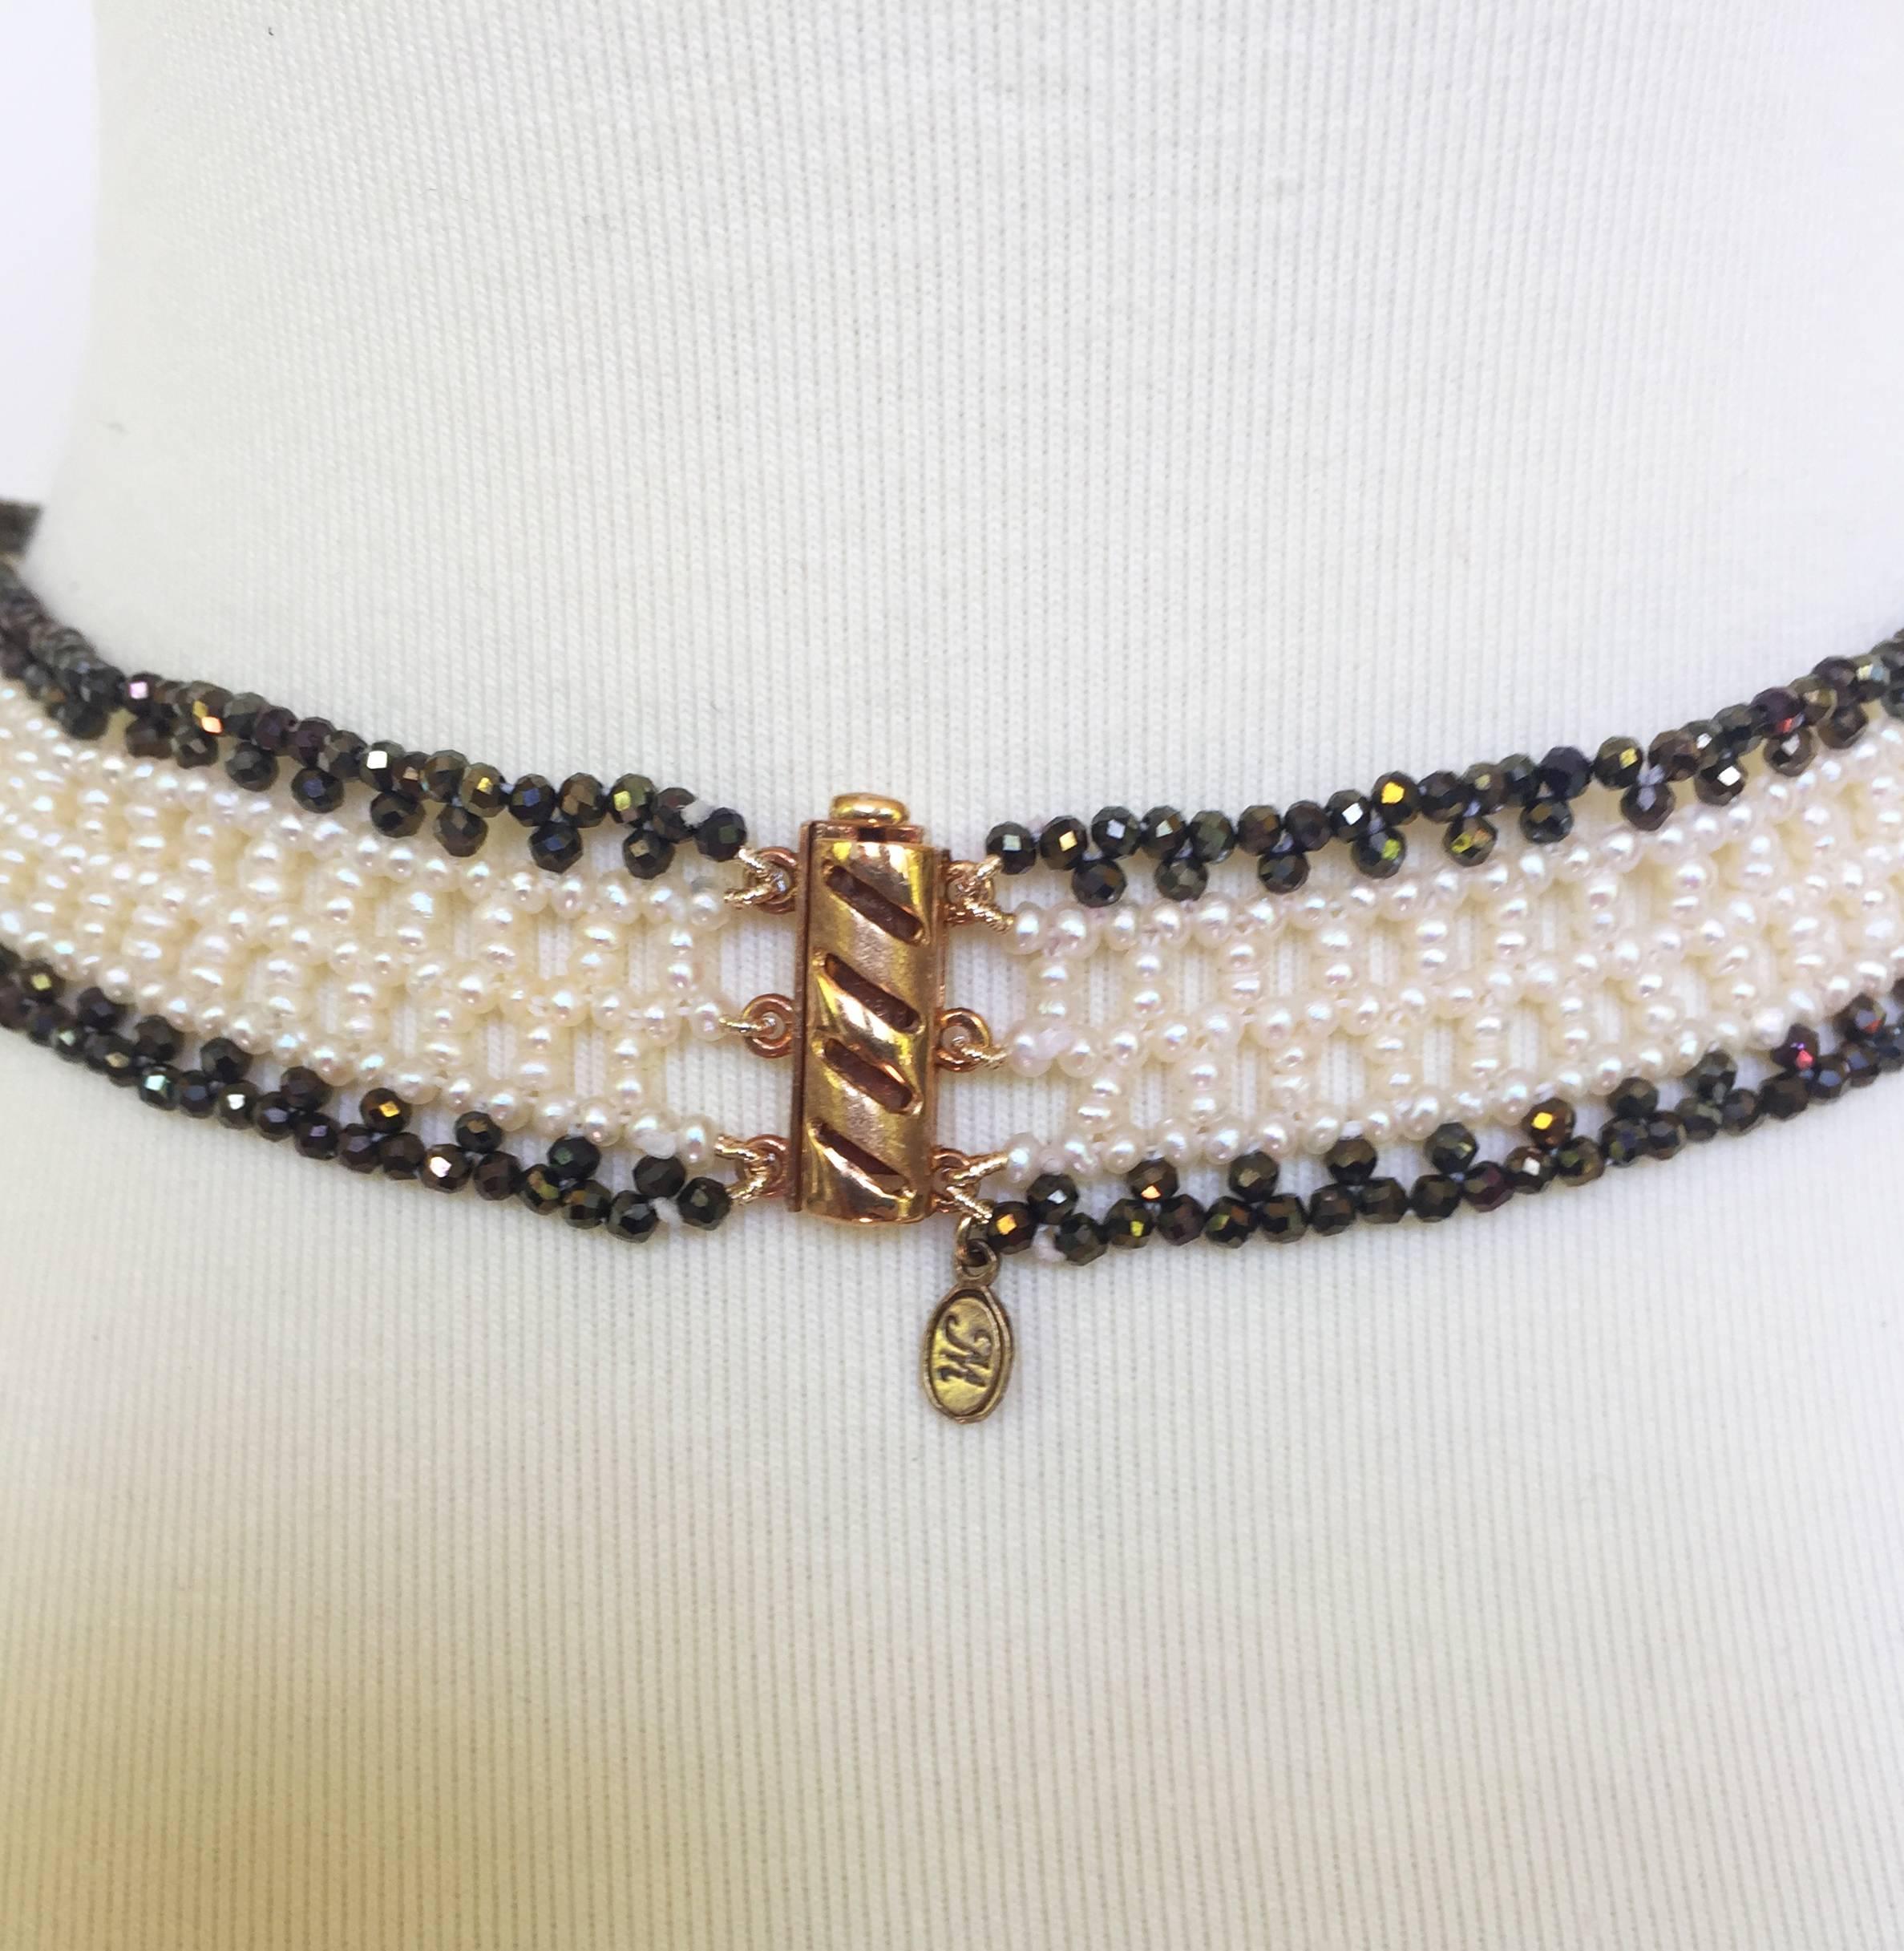 Women's Marina J White Woven Pearl and Black Spinel Collar Necklace with Sliding Clasp